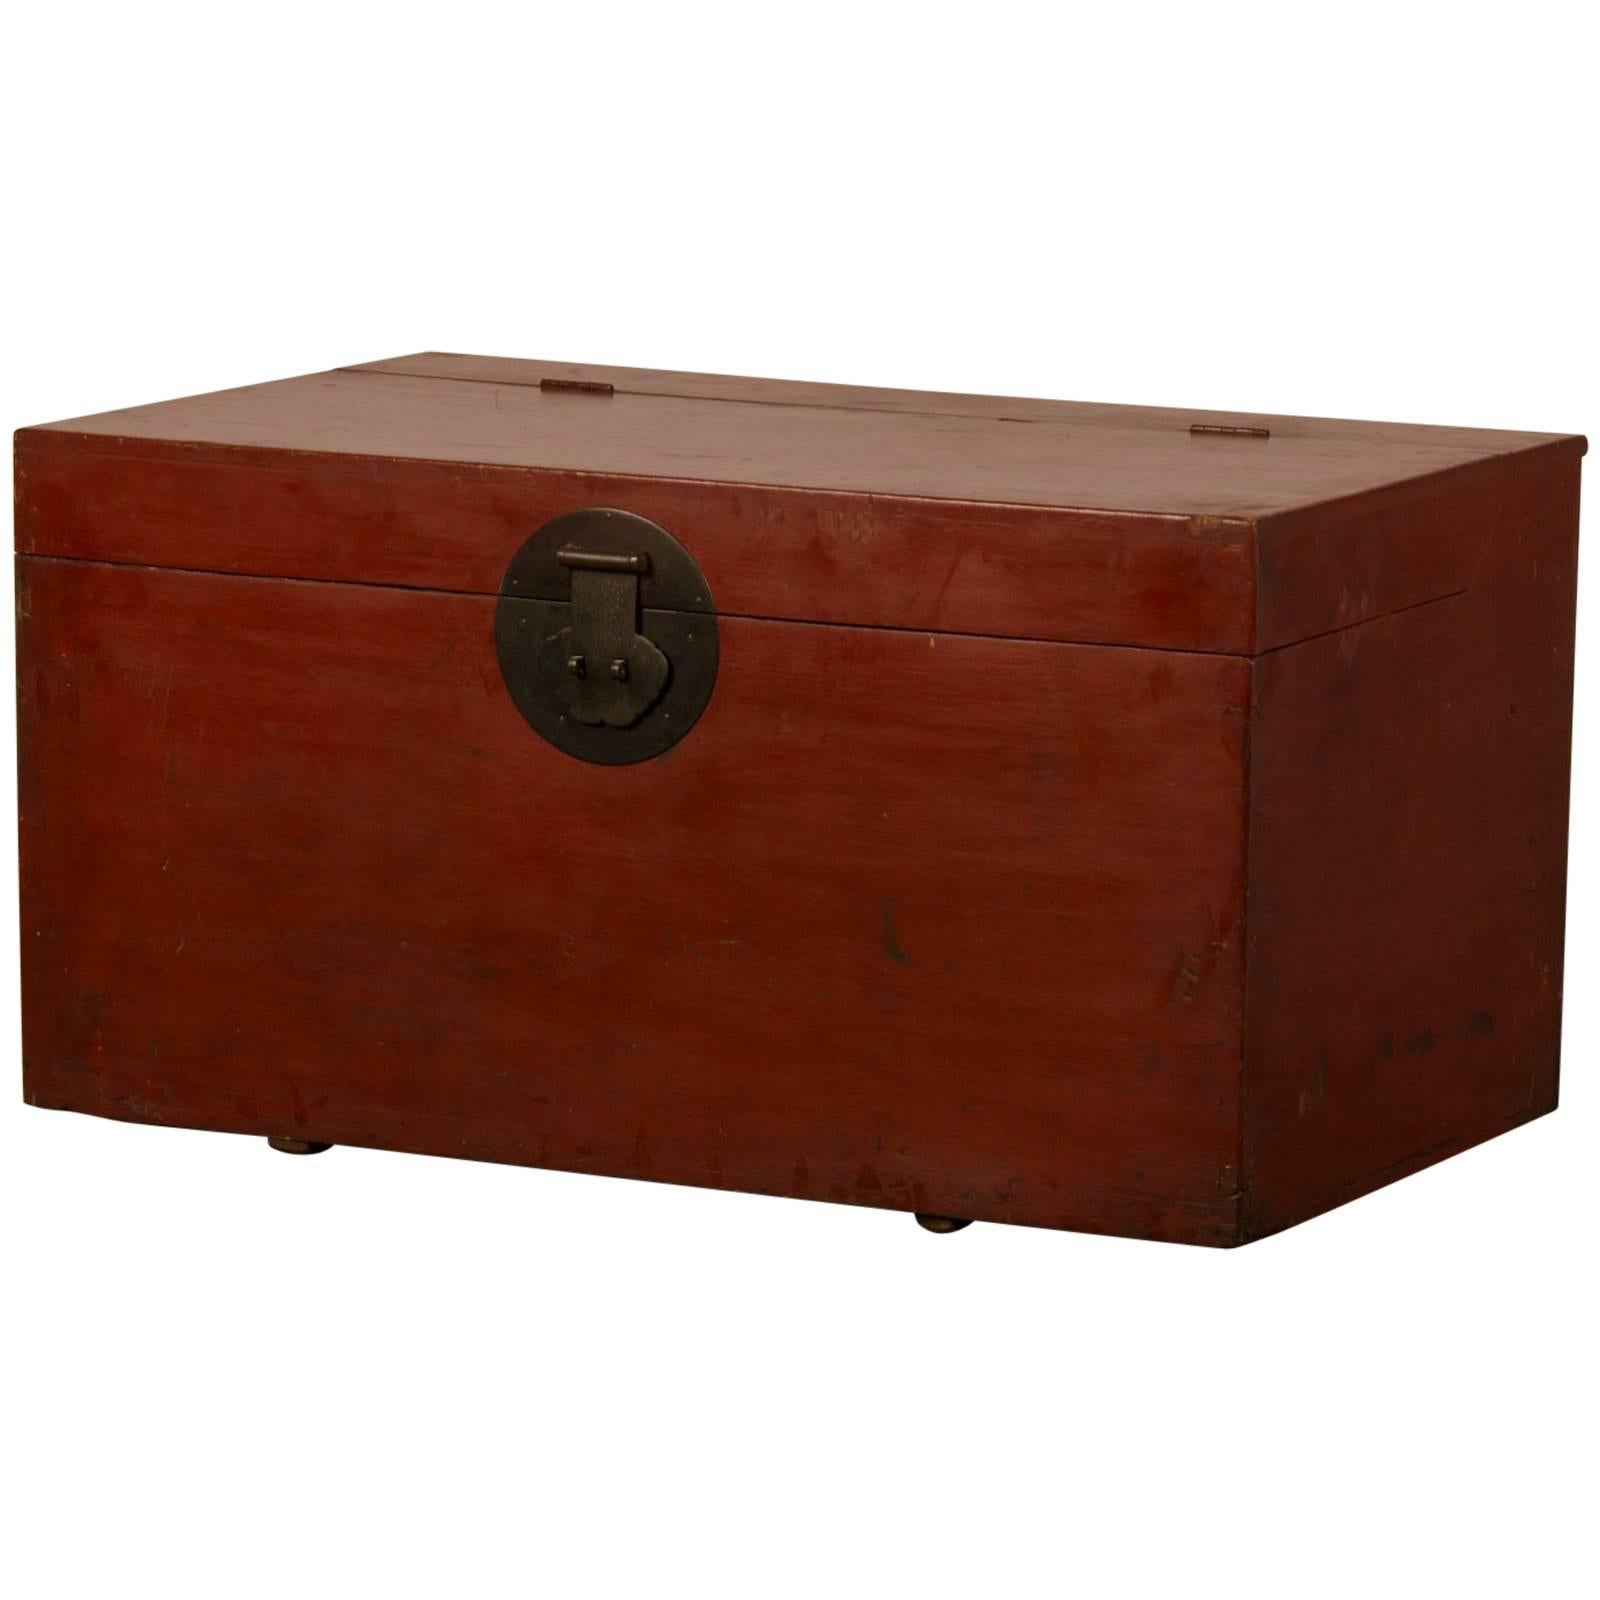 Large Antique Chinese Red Lacquer Trunk Kuang Hsu Period, circa 1875 For Sale